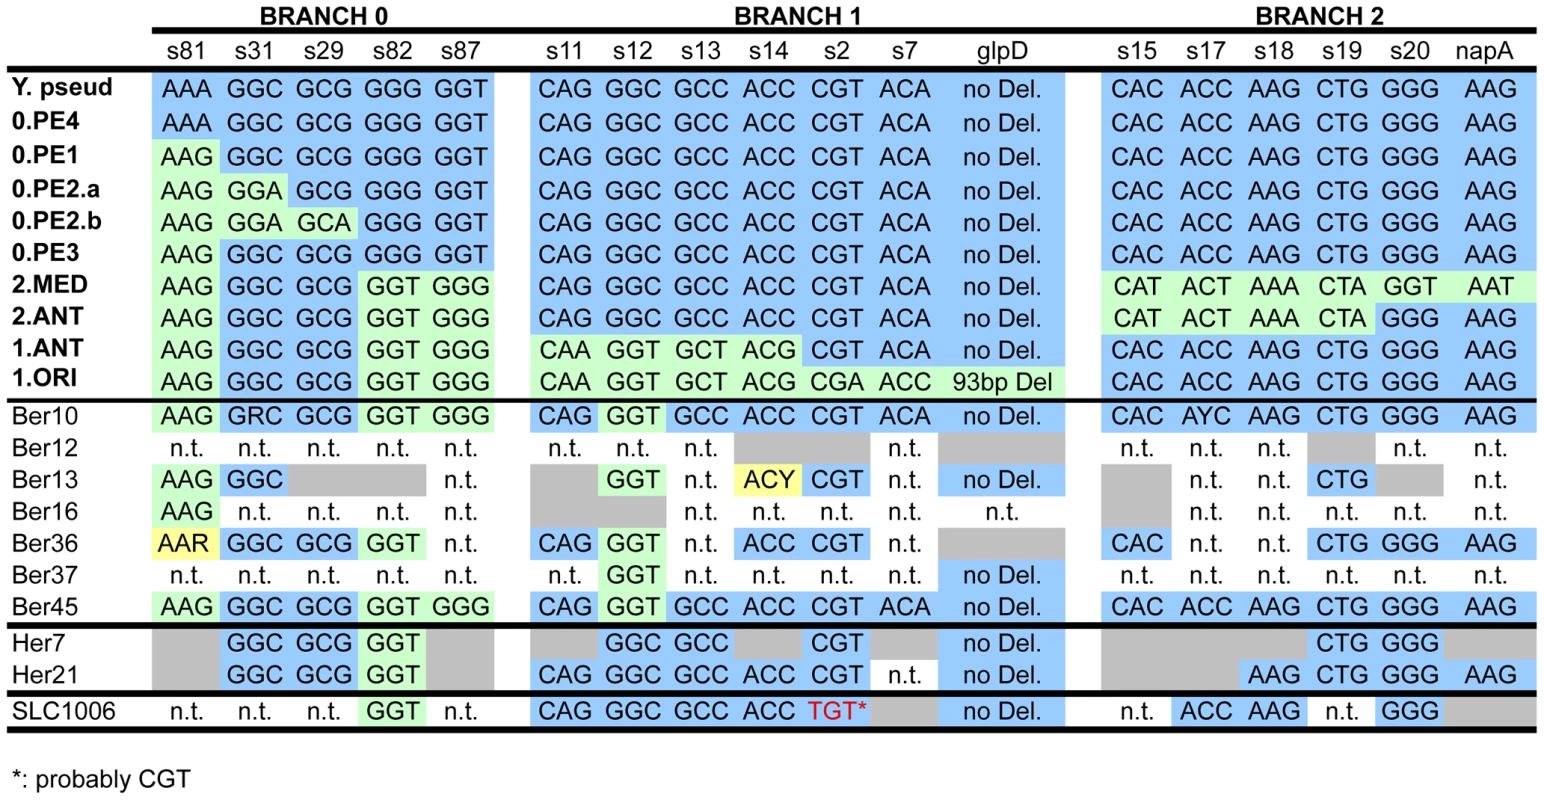 Analysis of aDNA from human remains with 18 markers (<i>glpD</i>, <i>napA</i> and 16 SNPs <em class=&quot;ref&quot;>[<b>11</b>]</em>) that define the three main branches of the <i>Y. pestis</i> evolutionary tree.